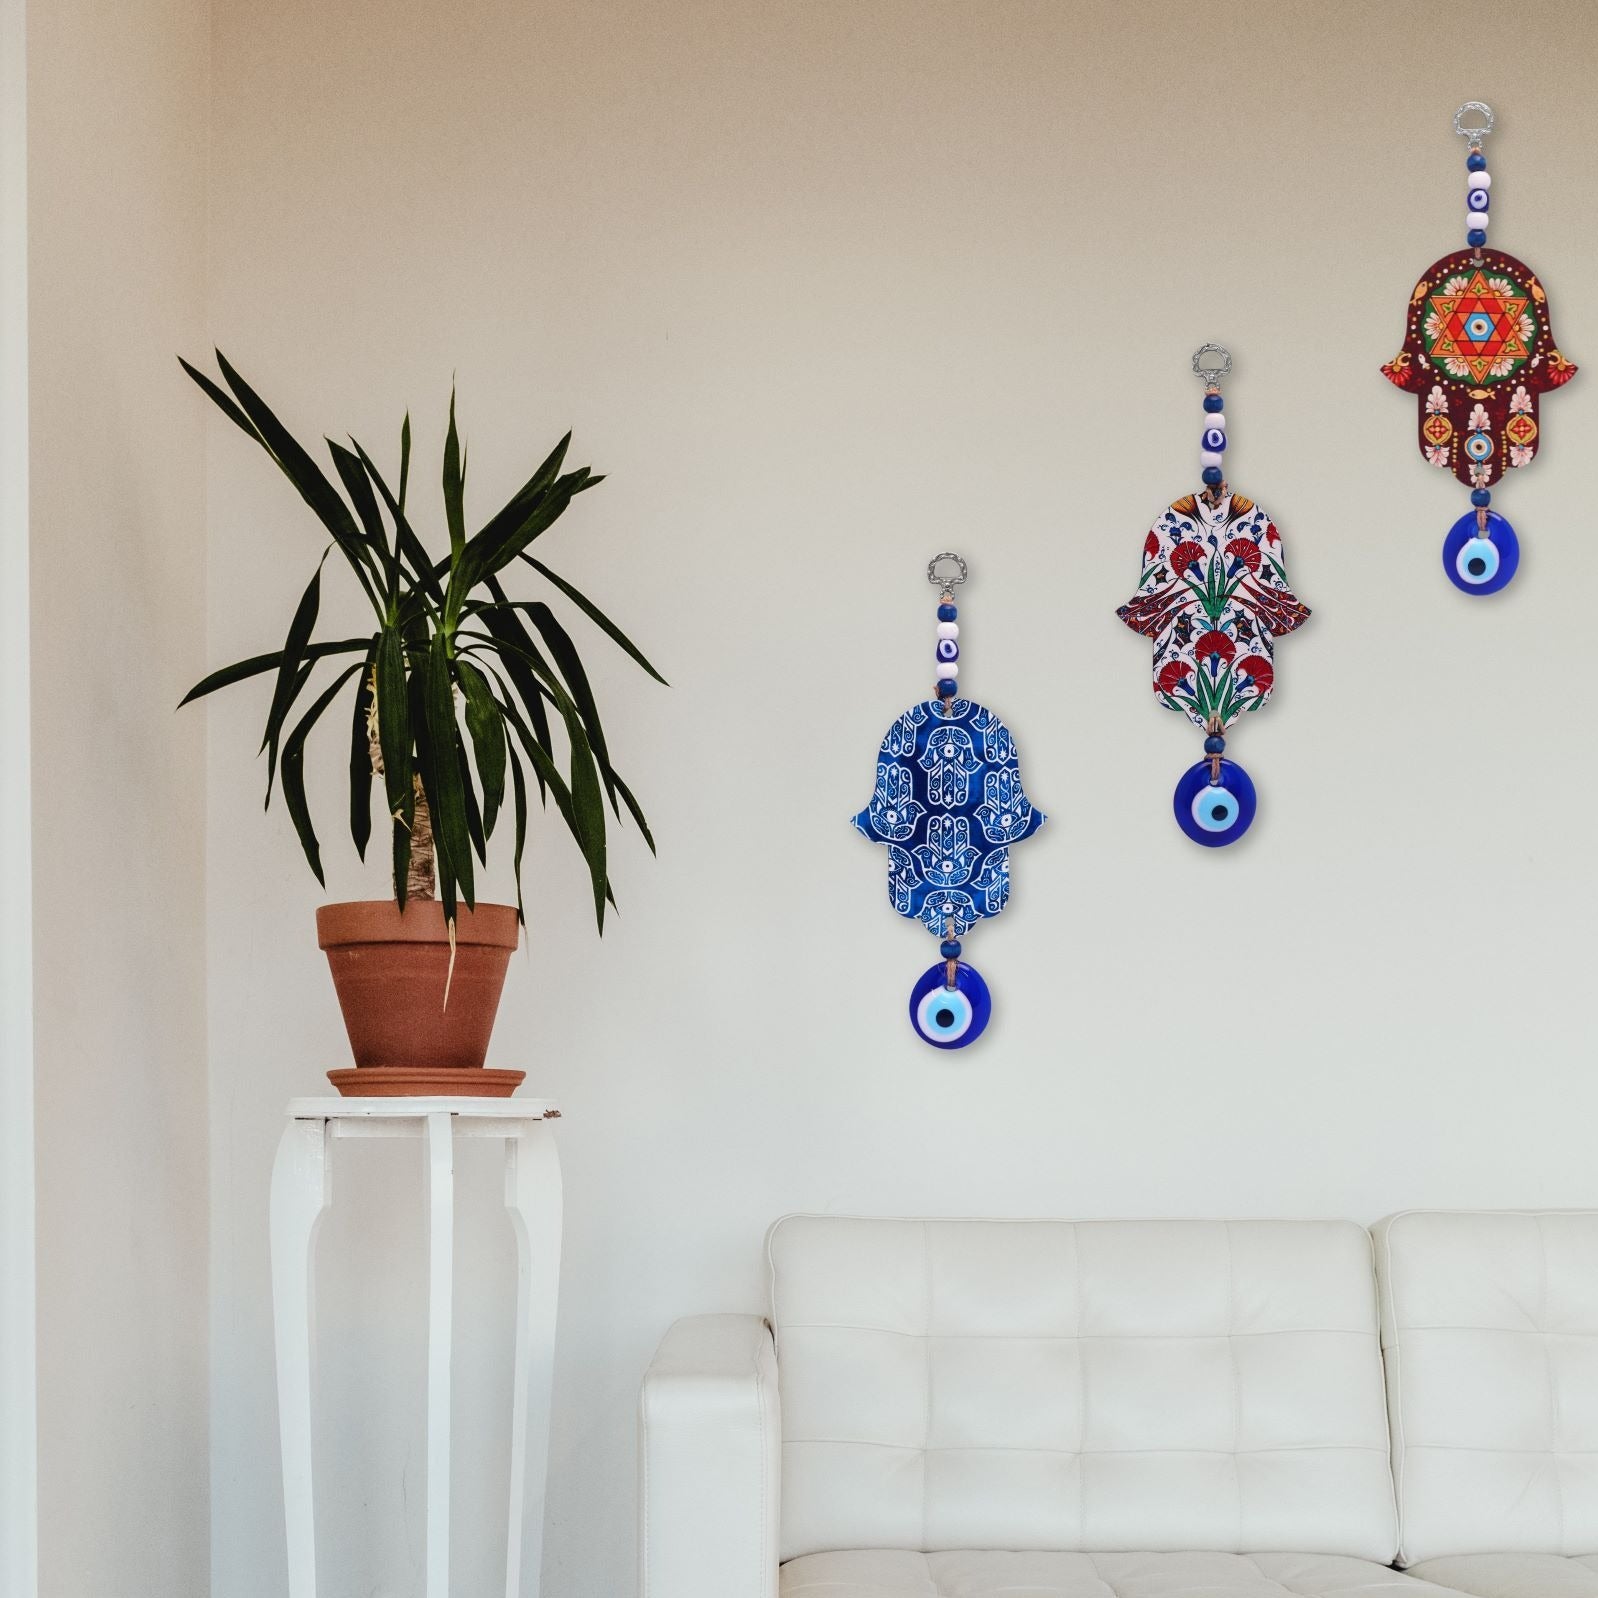 Hamsa Wall Decor with Jewish Star for Home with Evil Eye | Alef Bet by ...